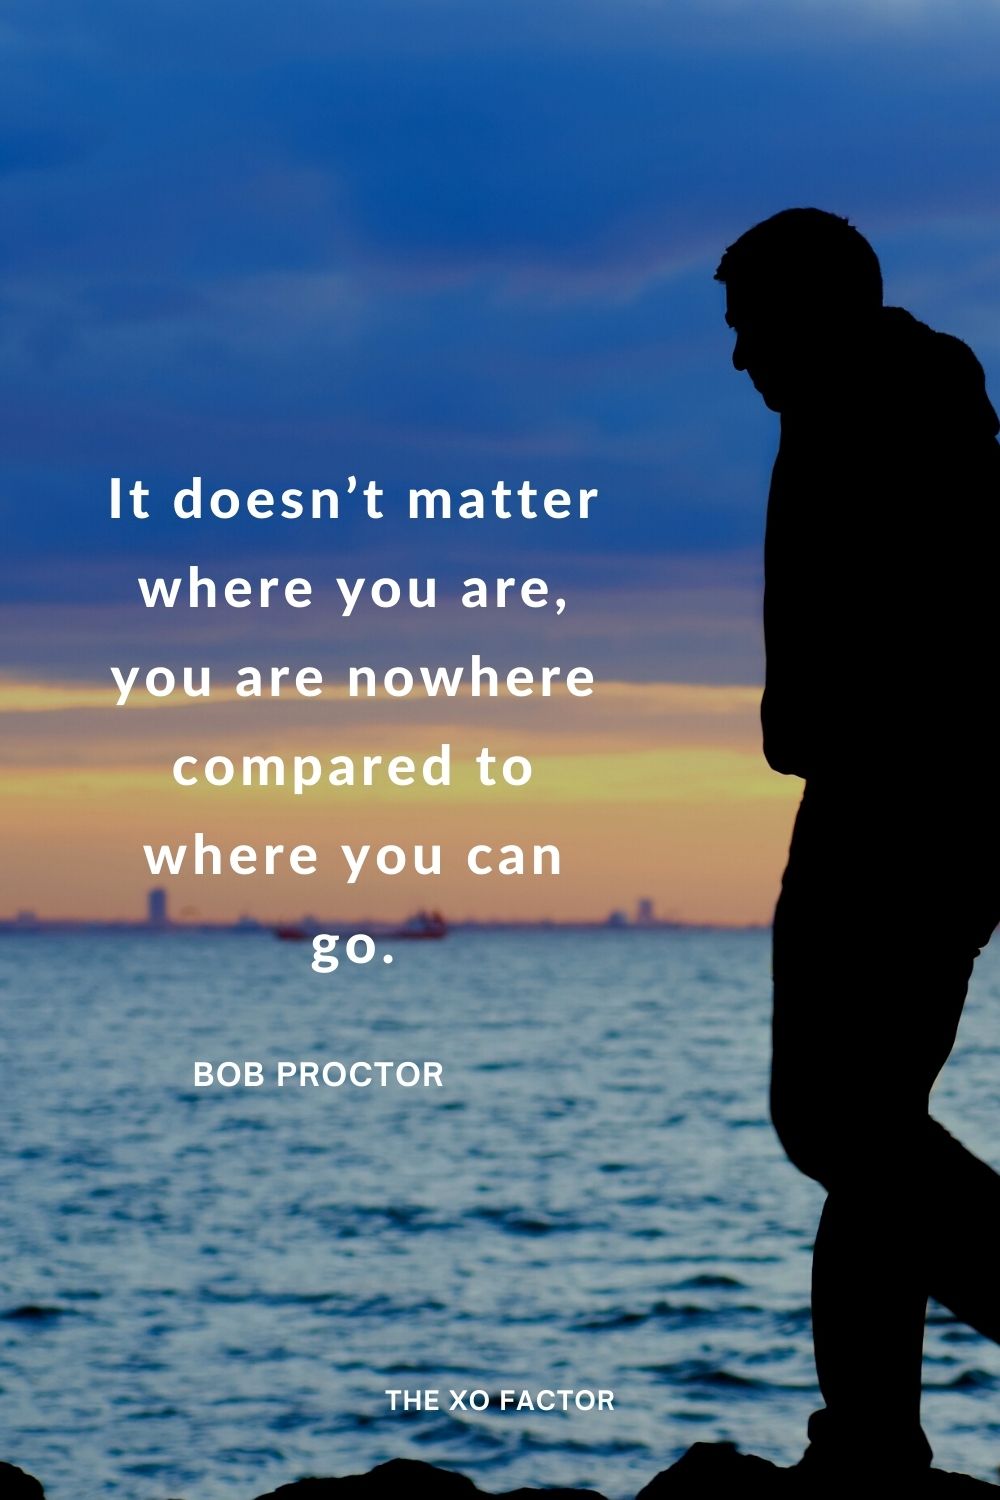 It doesn’t matter where you are, you are nowhere compared to where you can go.